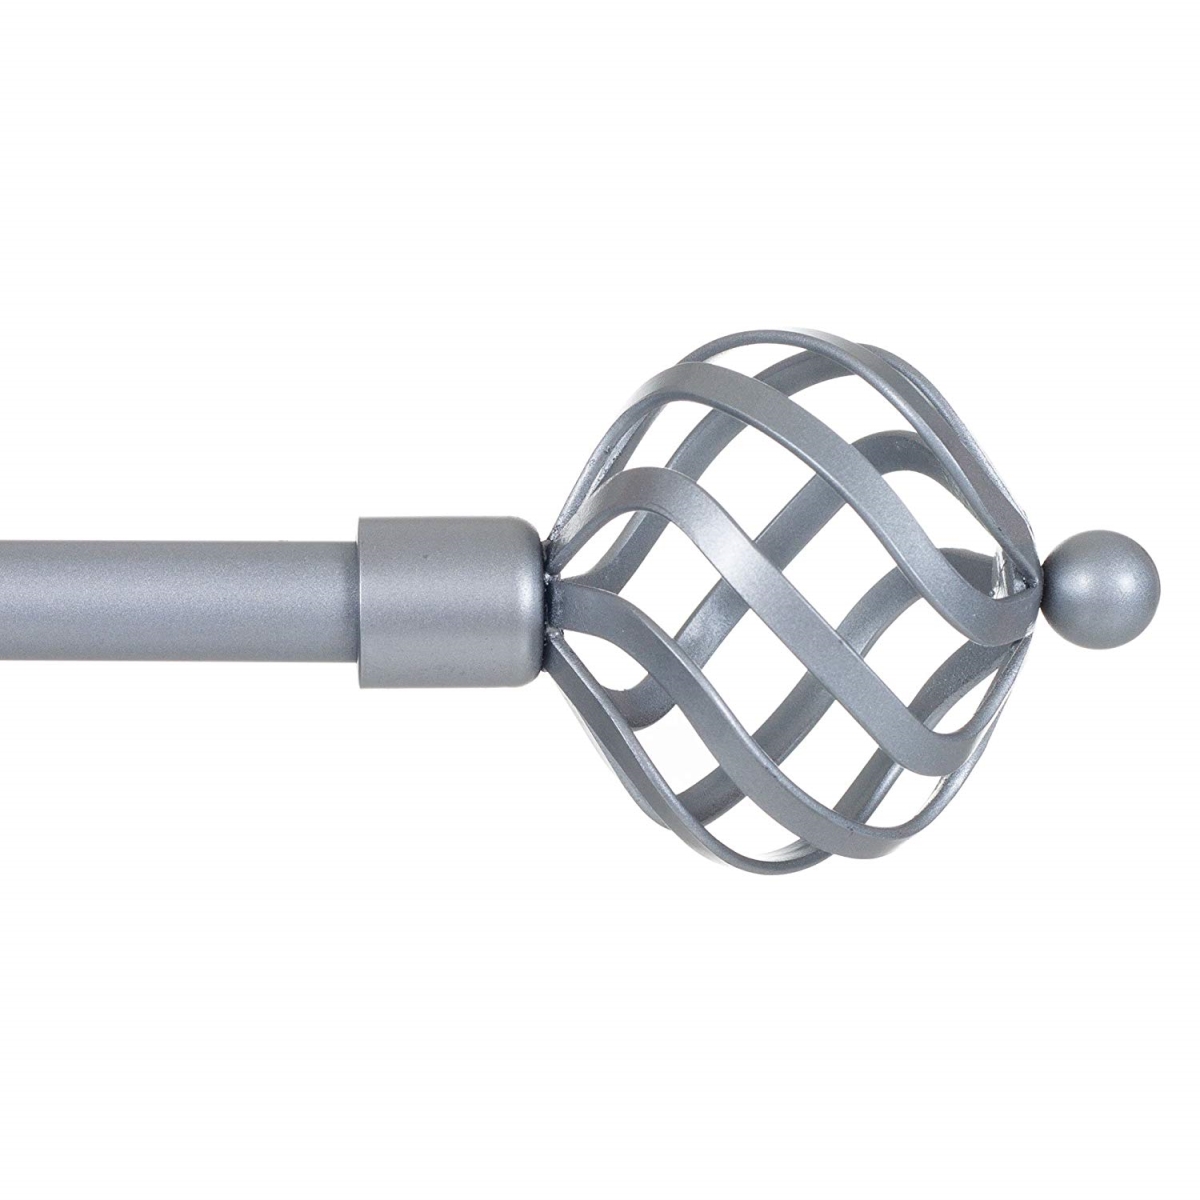 63a-19394 Twisted Sphere Curtain Rod For Window, Silver - 0.75 In.